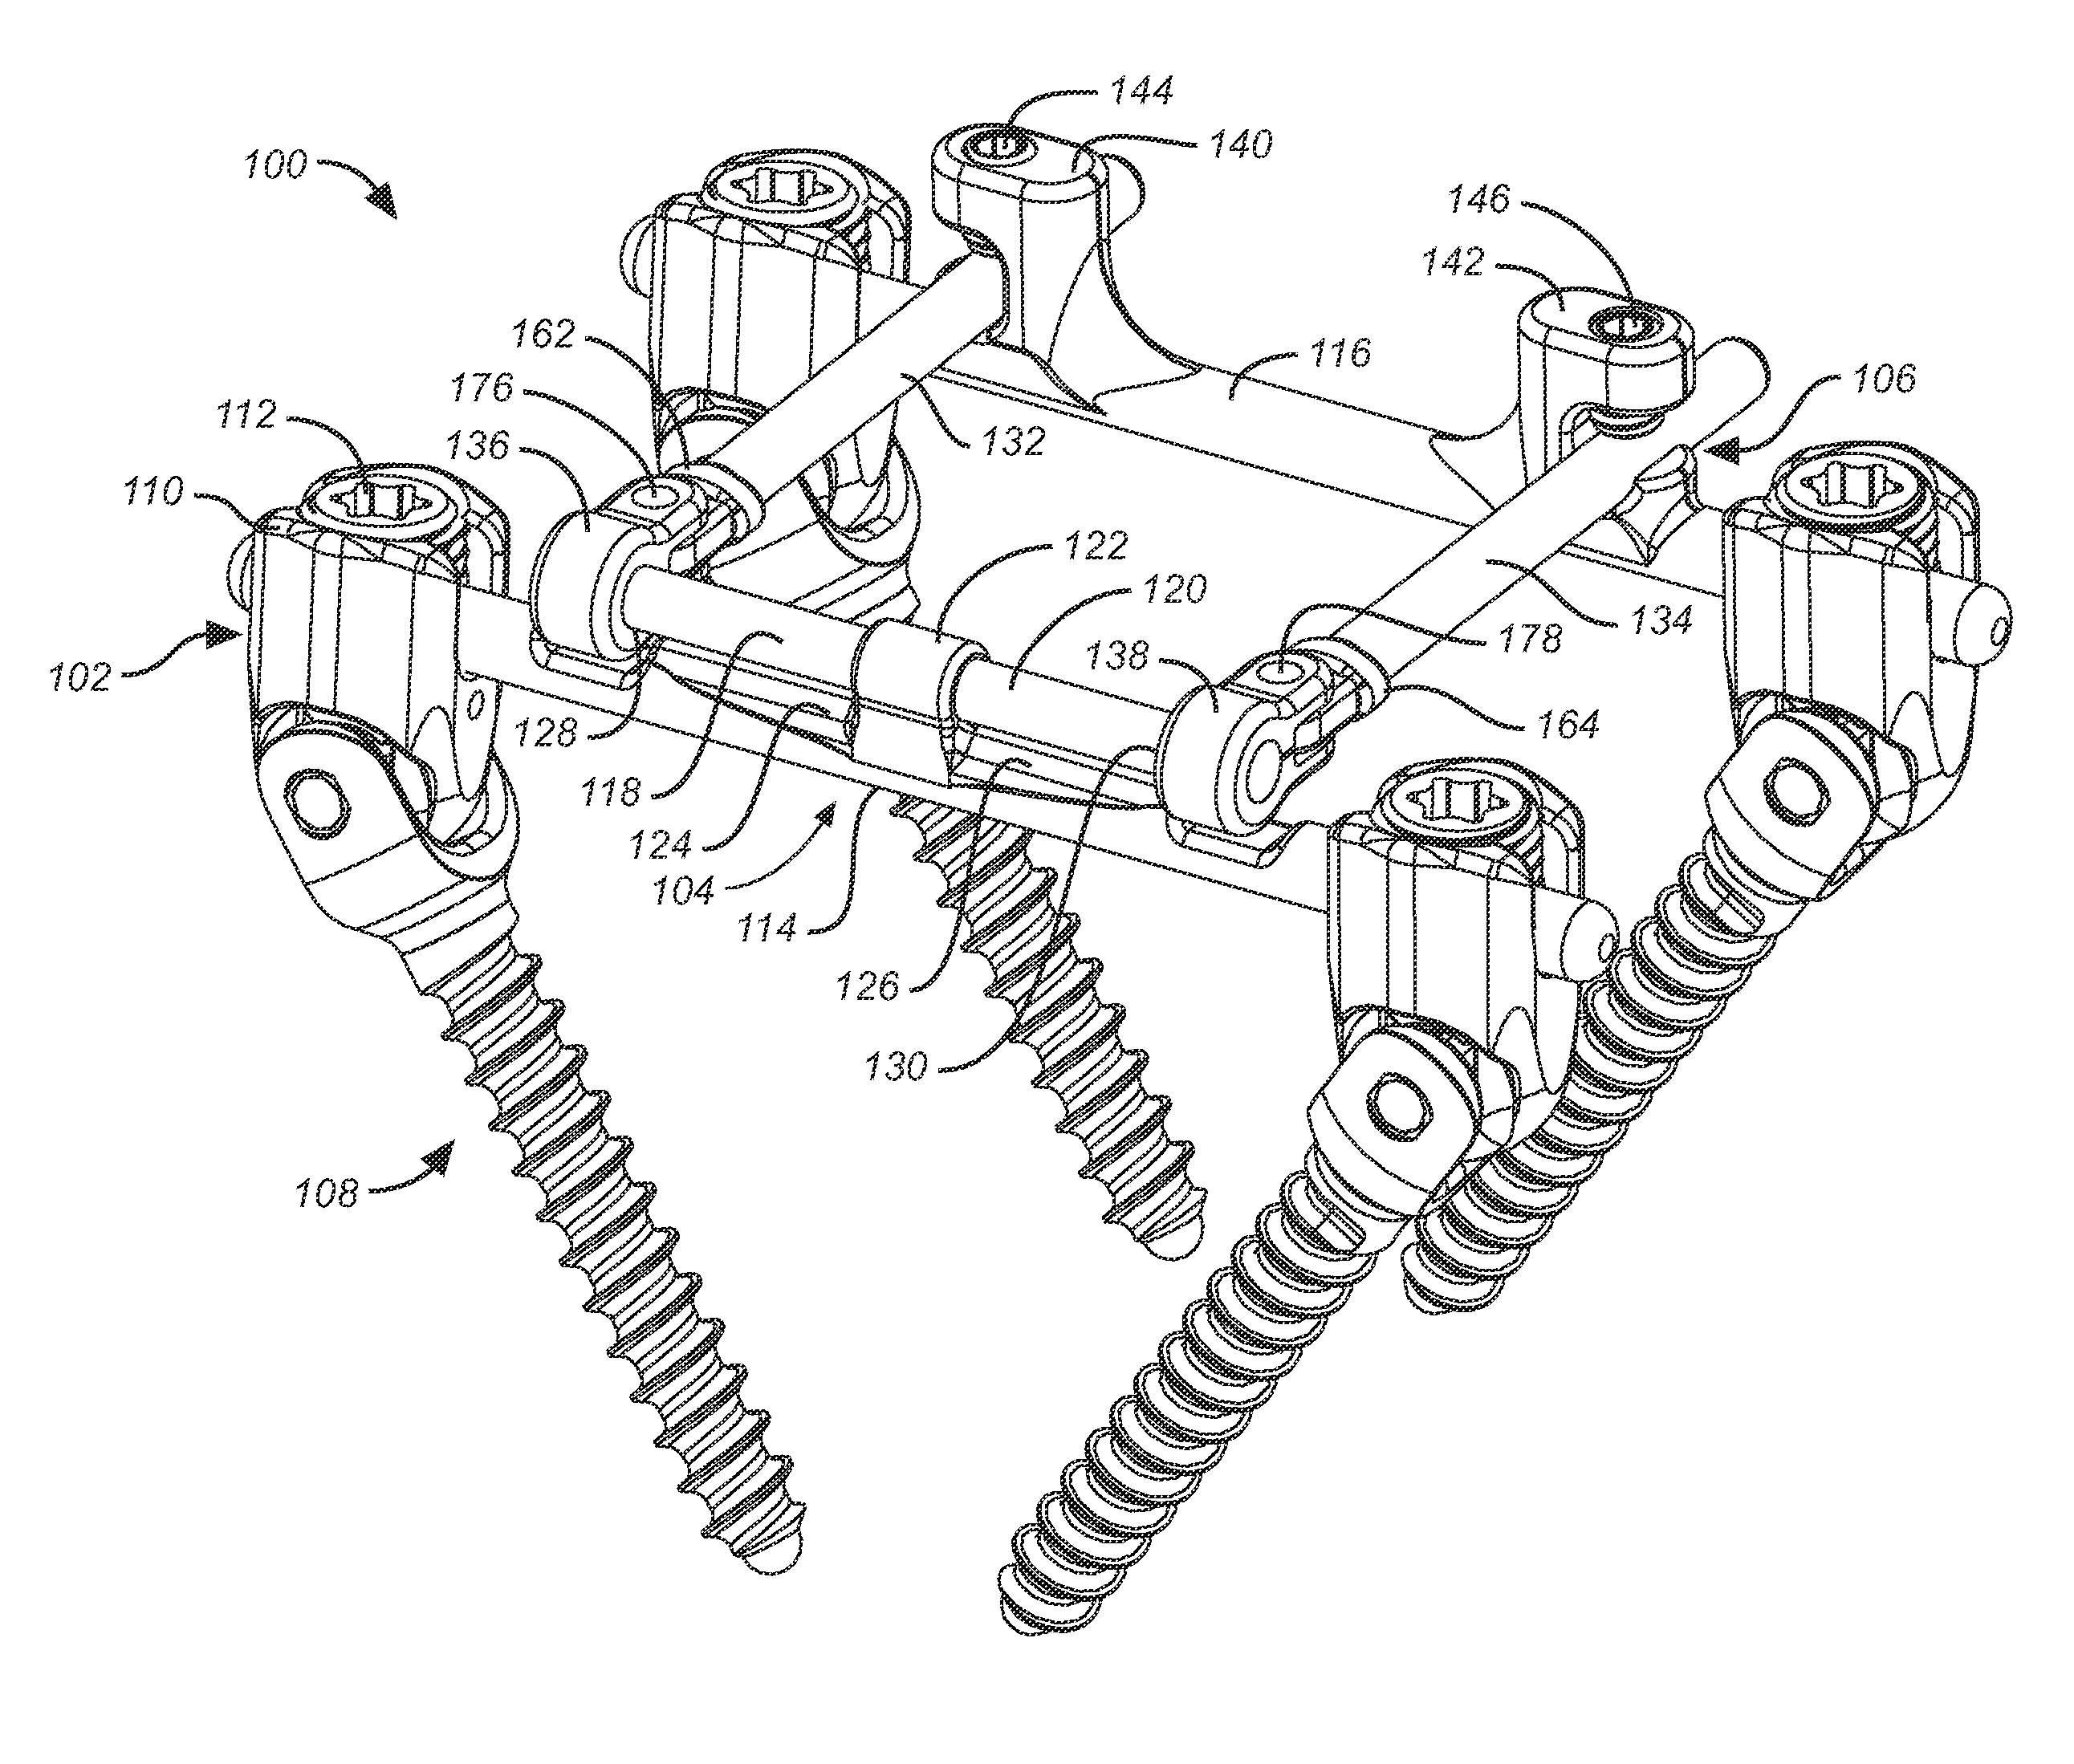 Multi-dimensional horizontal rod for a dynamic stabilization and motion preservation spinal implantation system and method